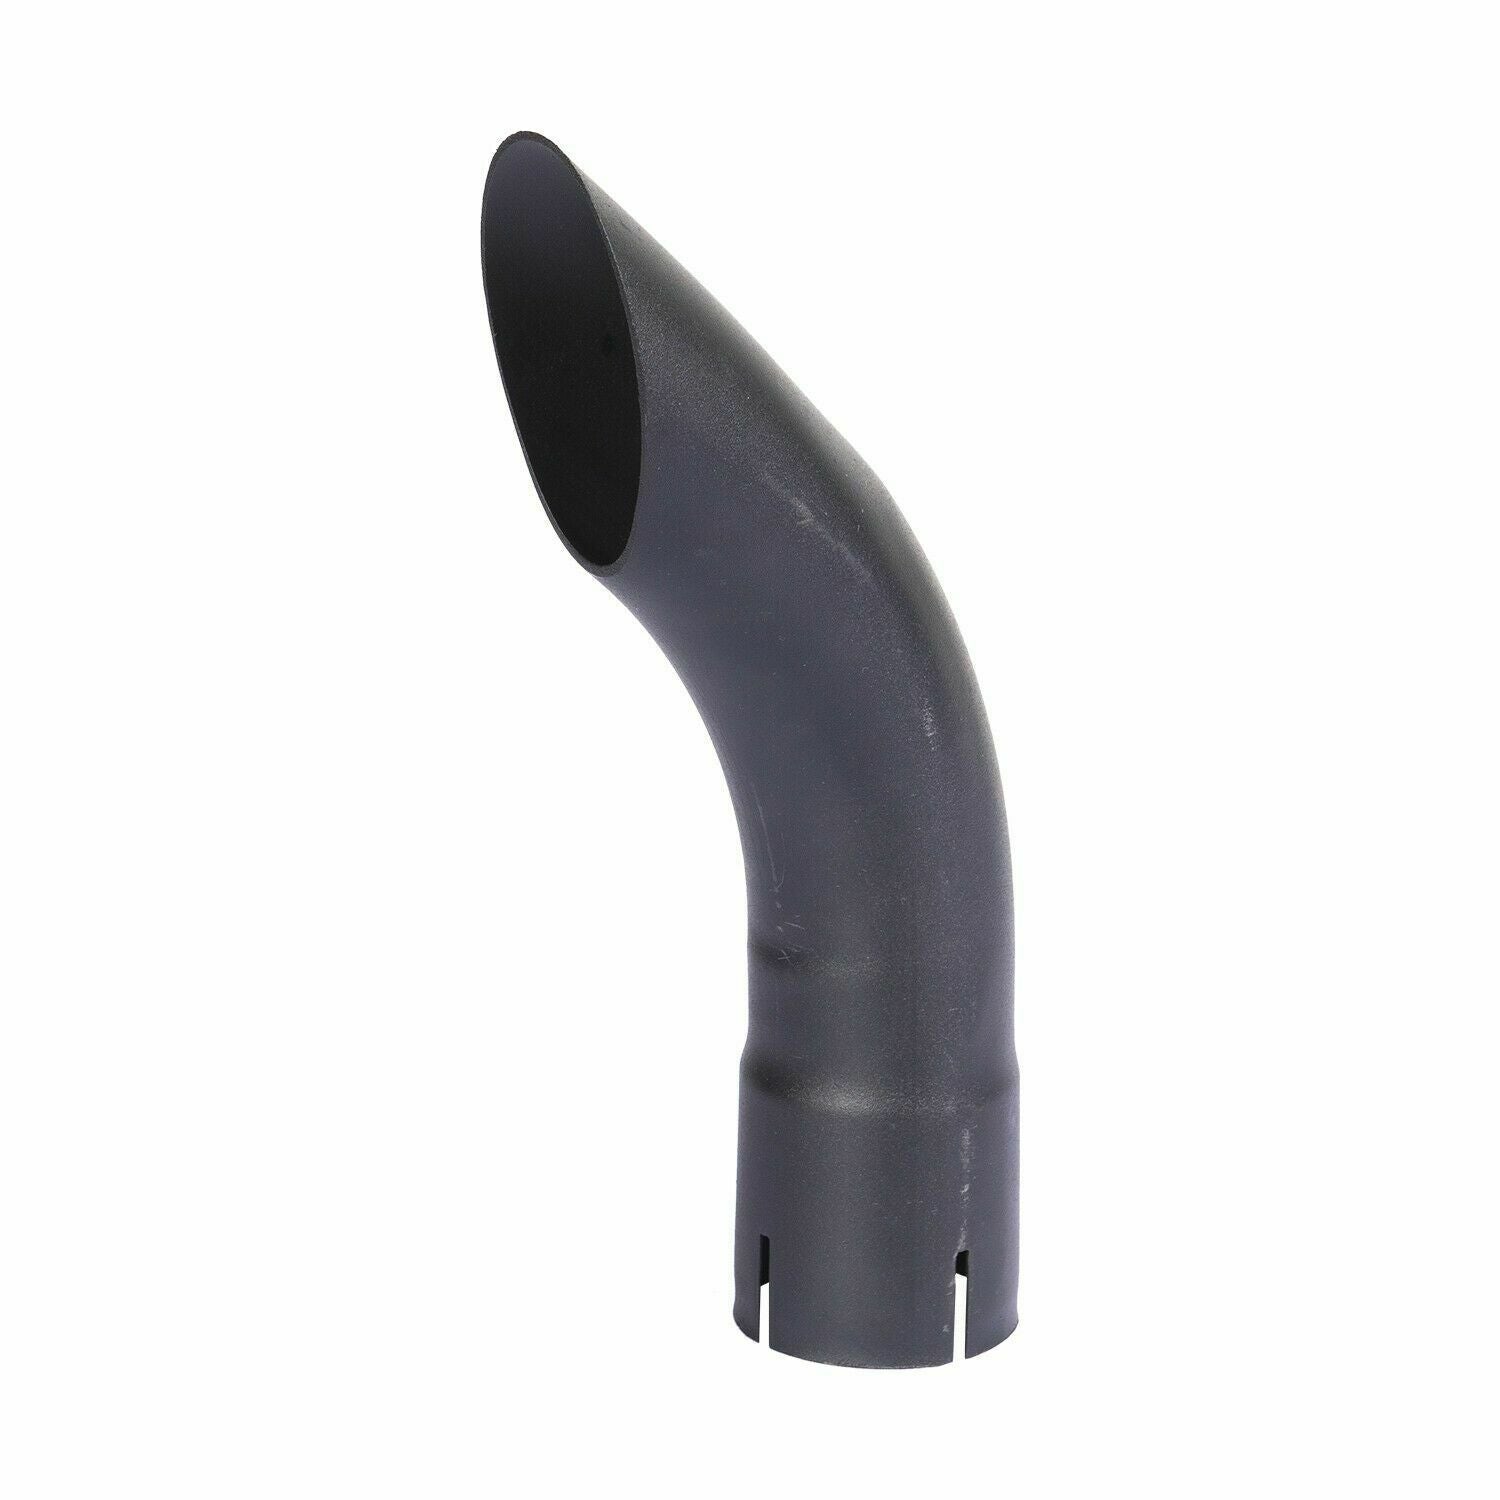 Exhaust Stack Pipe   2-1/2" x 12" Curved Black